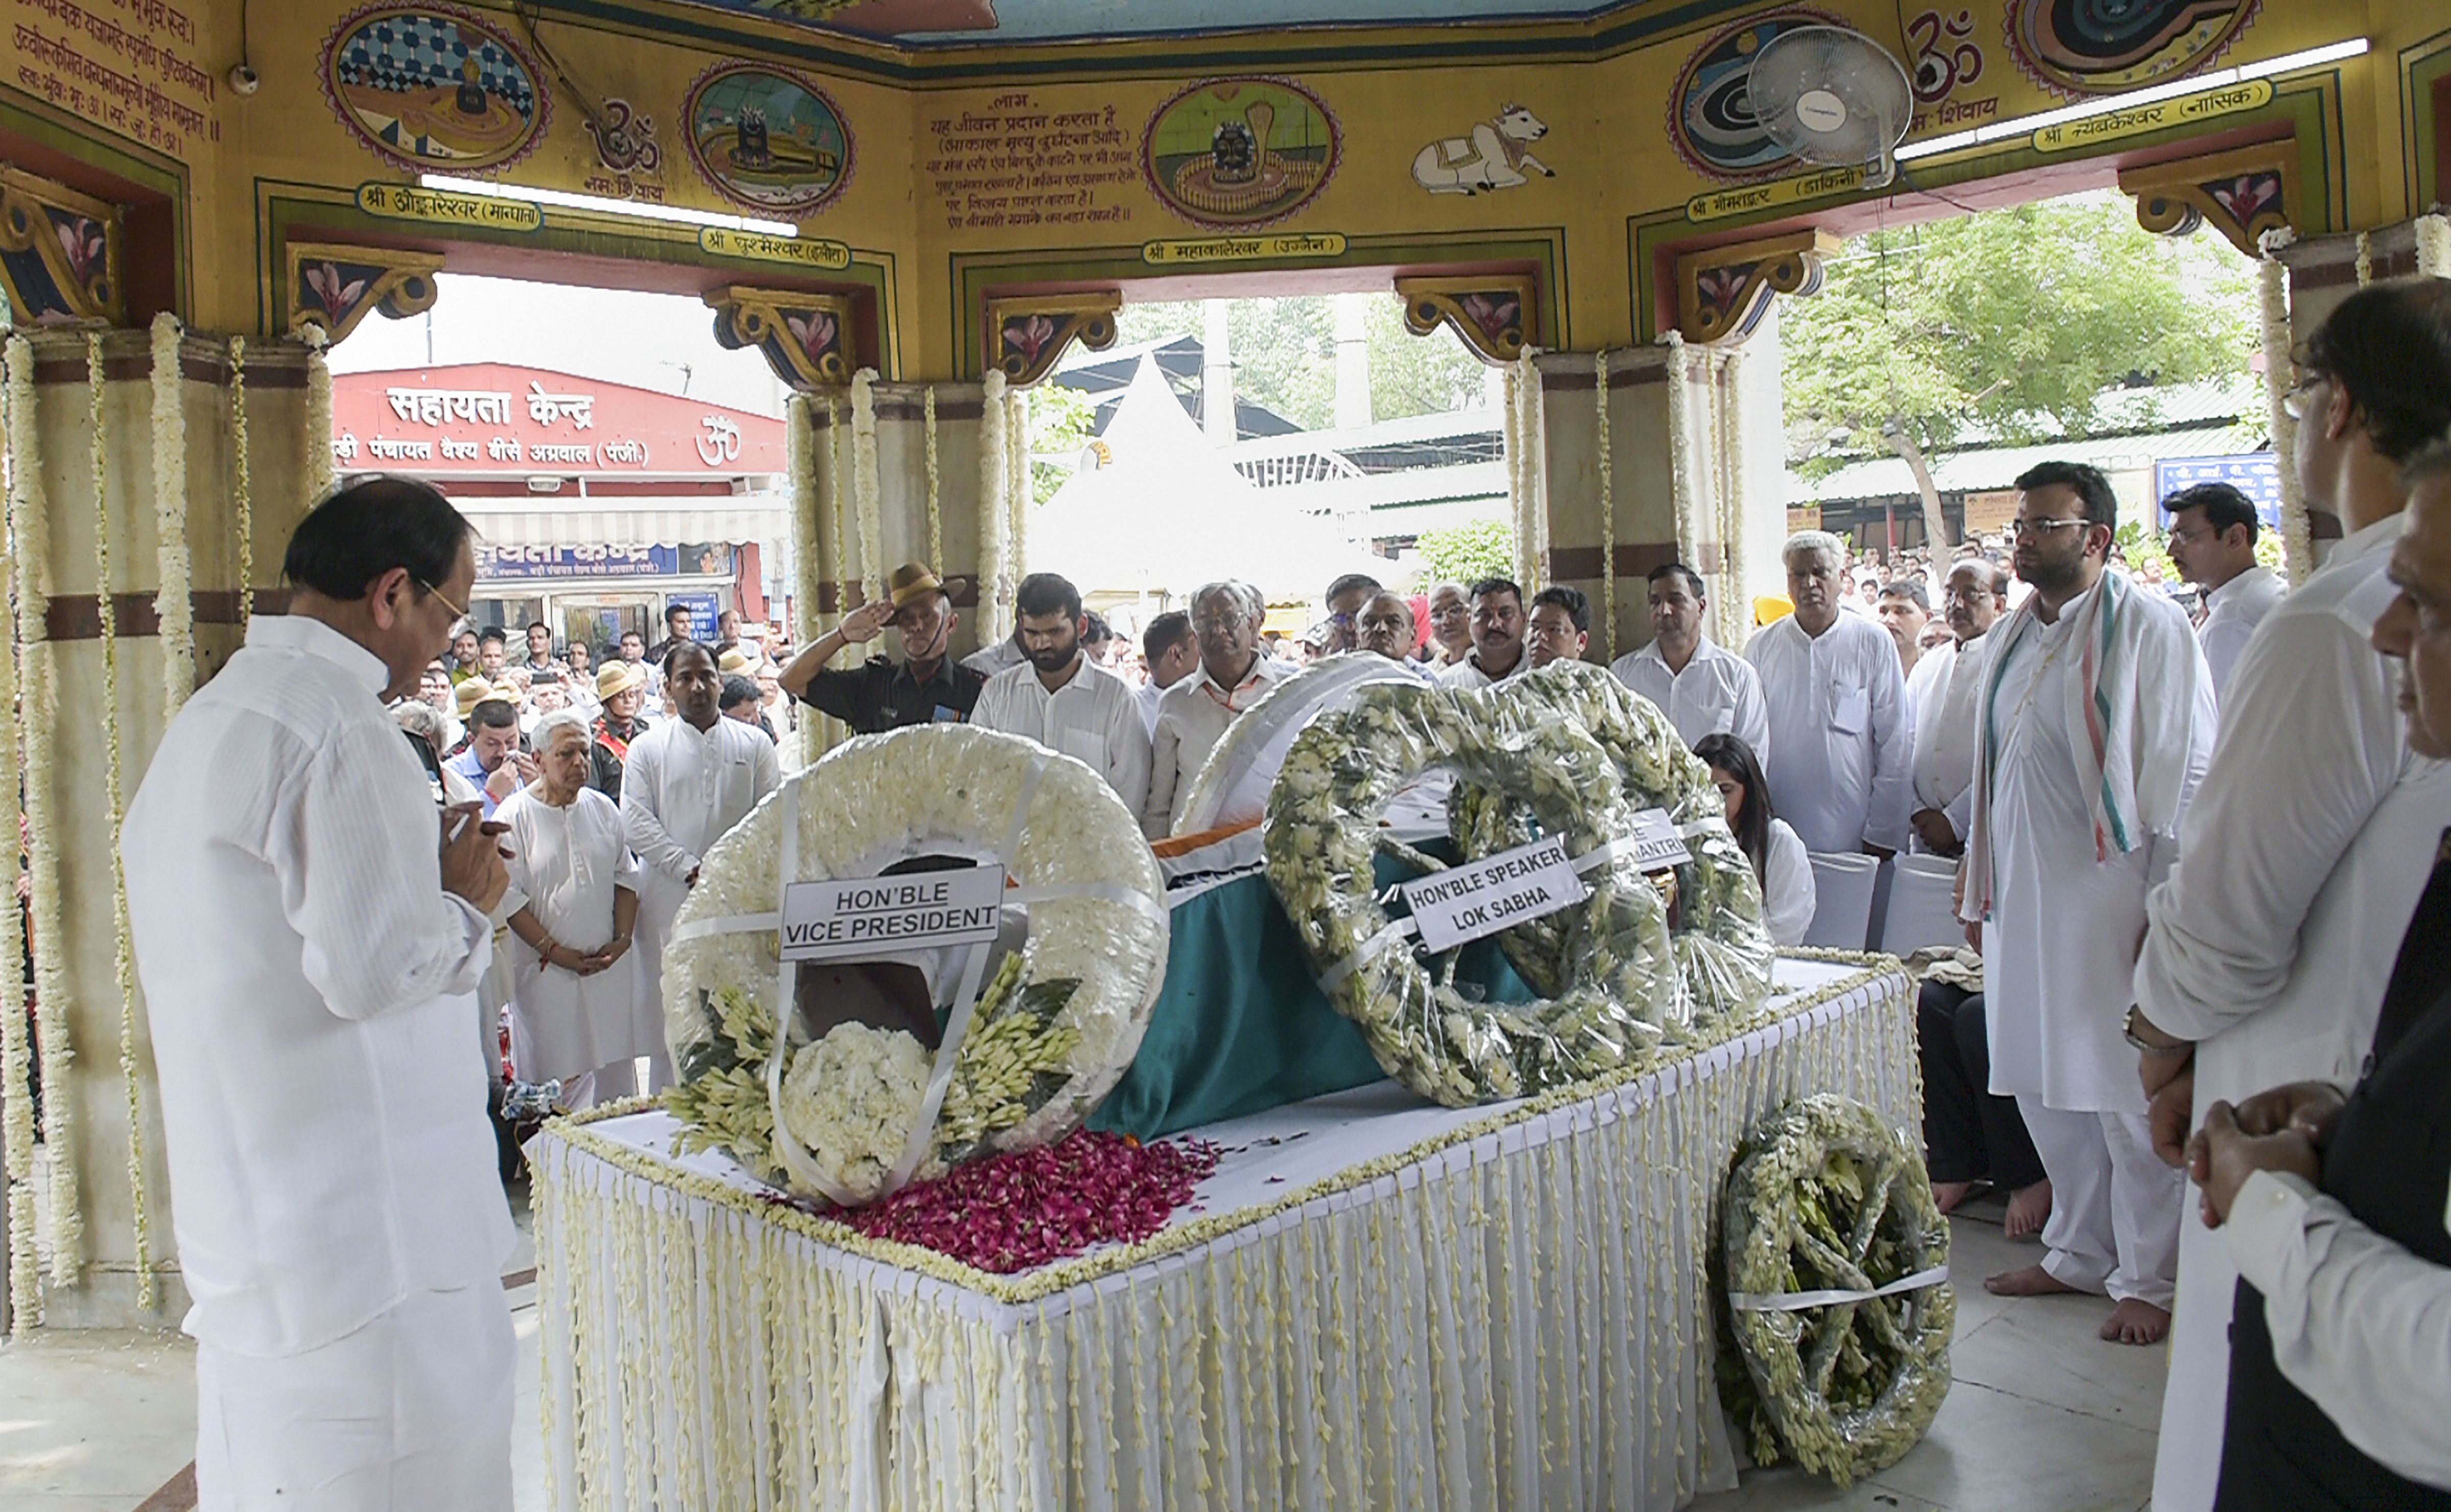 Arun Jaitley cremated with full state honours at Nigambodh Ghat